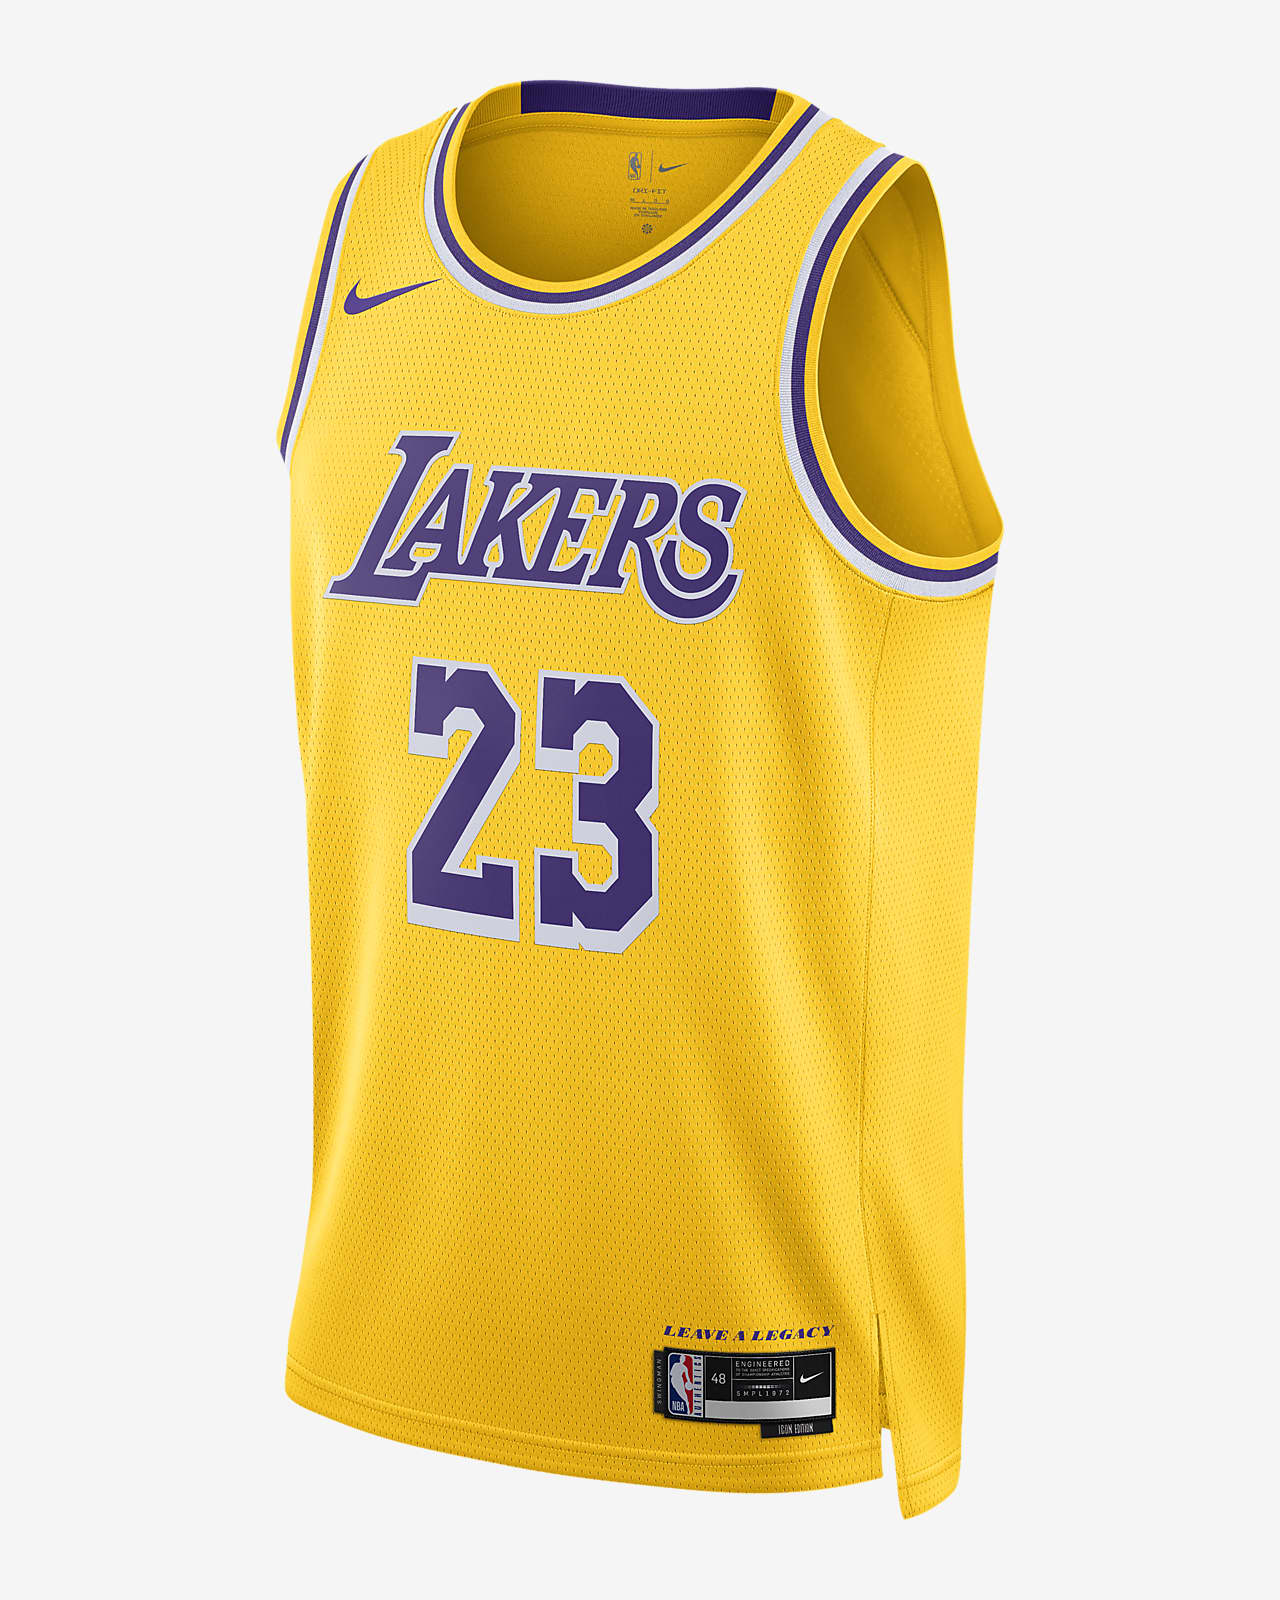 los angeles lakers clothing